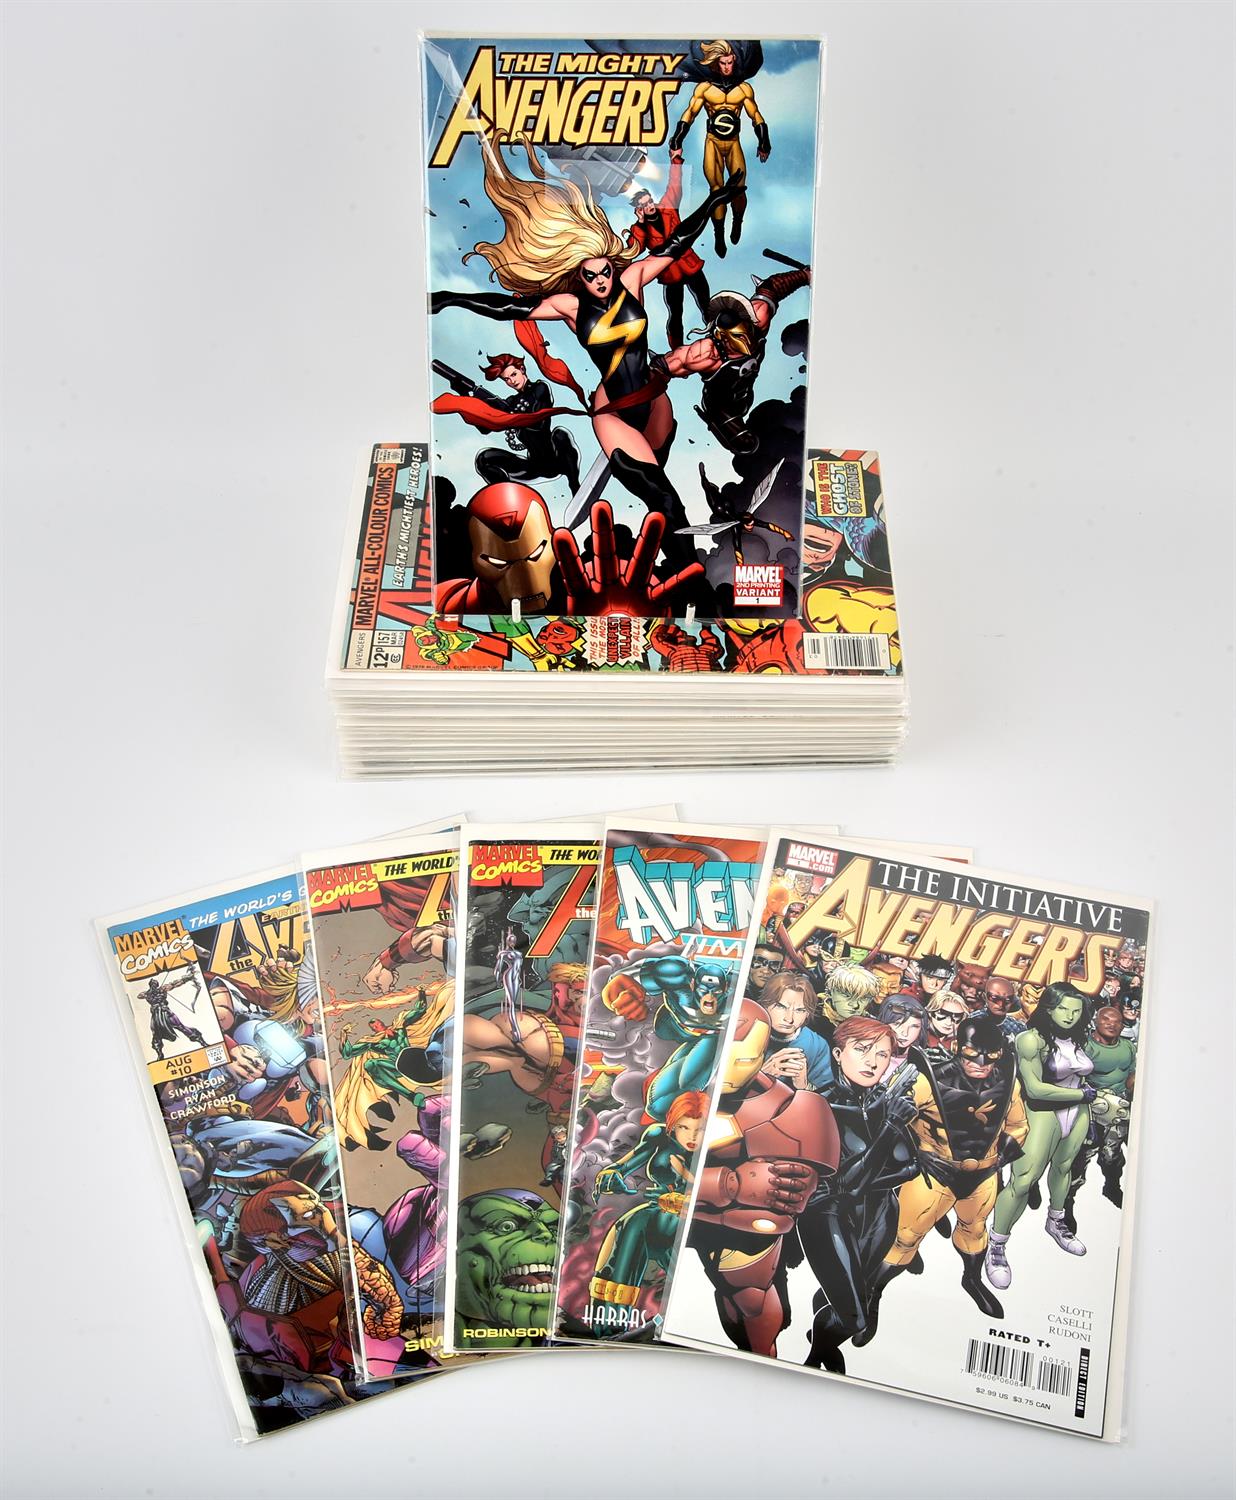 Marvel Comics: Avengers. A group of 29 Avengers comics featuring notable covers and issues (1976